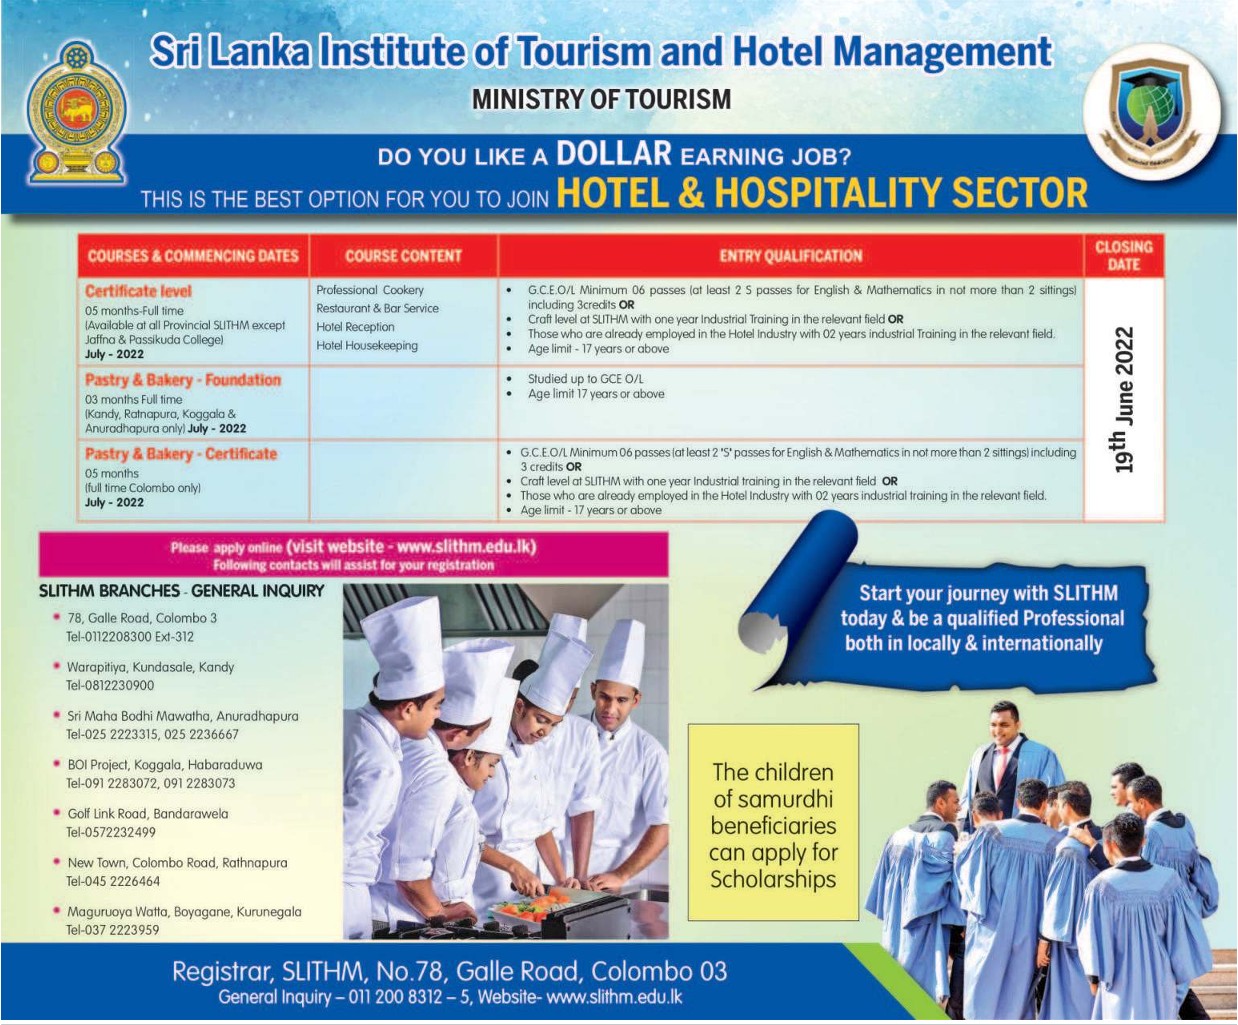 Bakery Certificate Course 2022 - Institute of Tourism & Hotel Management Courses